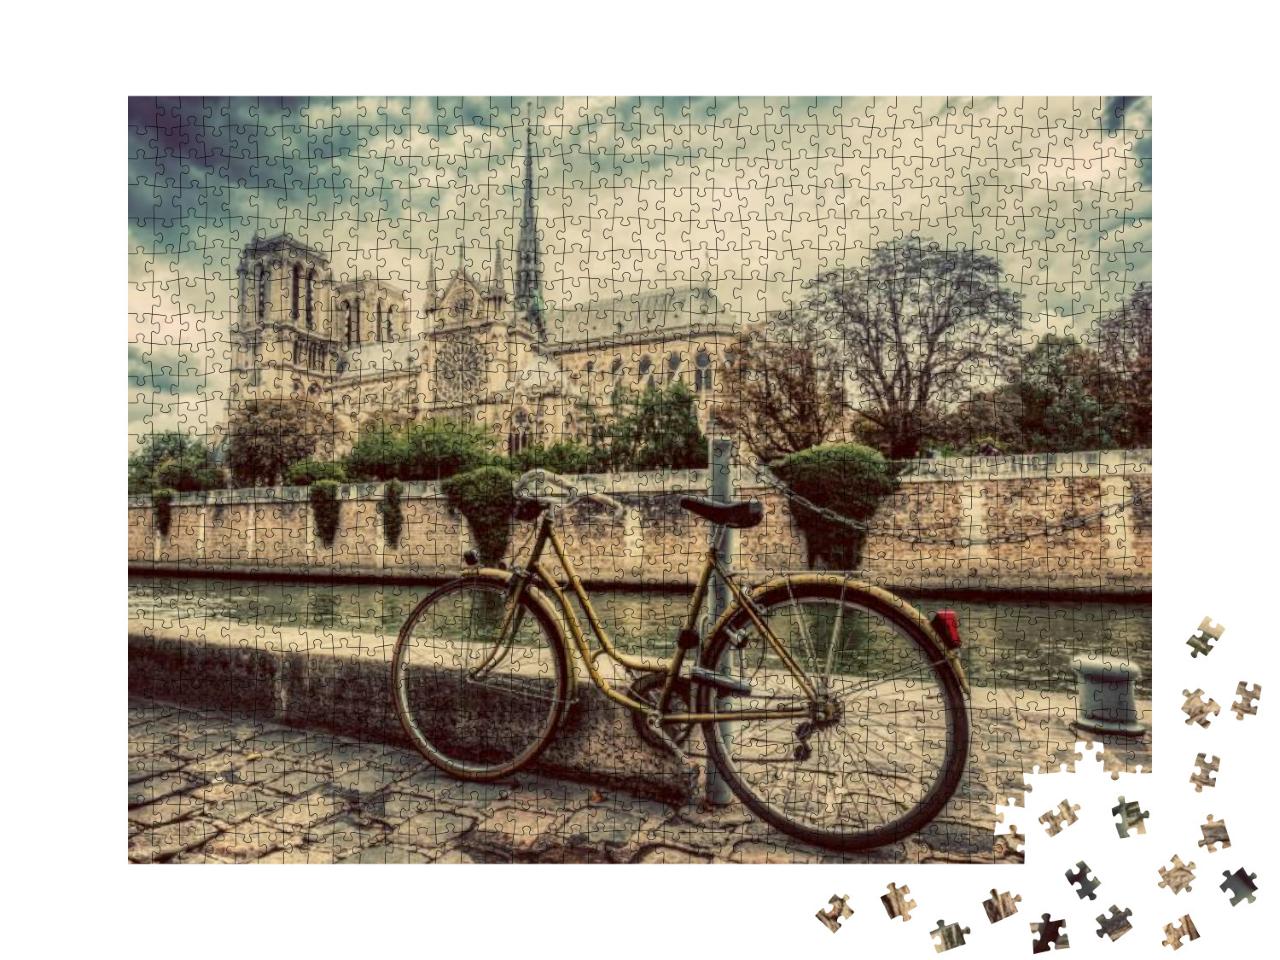 Retro Bike Next to Notre Dame Cathedral in Paris, France... Jigsaw Puzzle with 1000 pieces